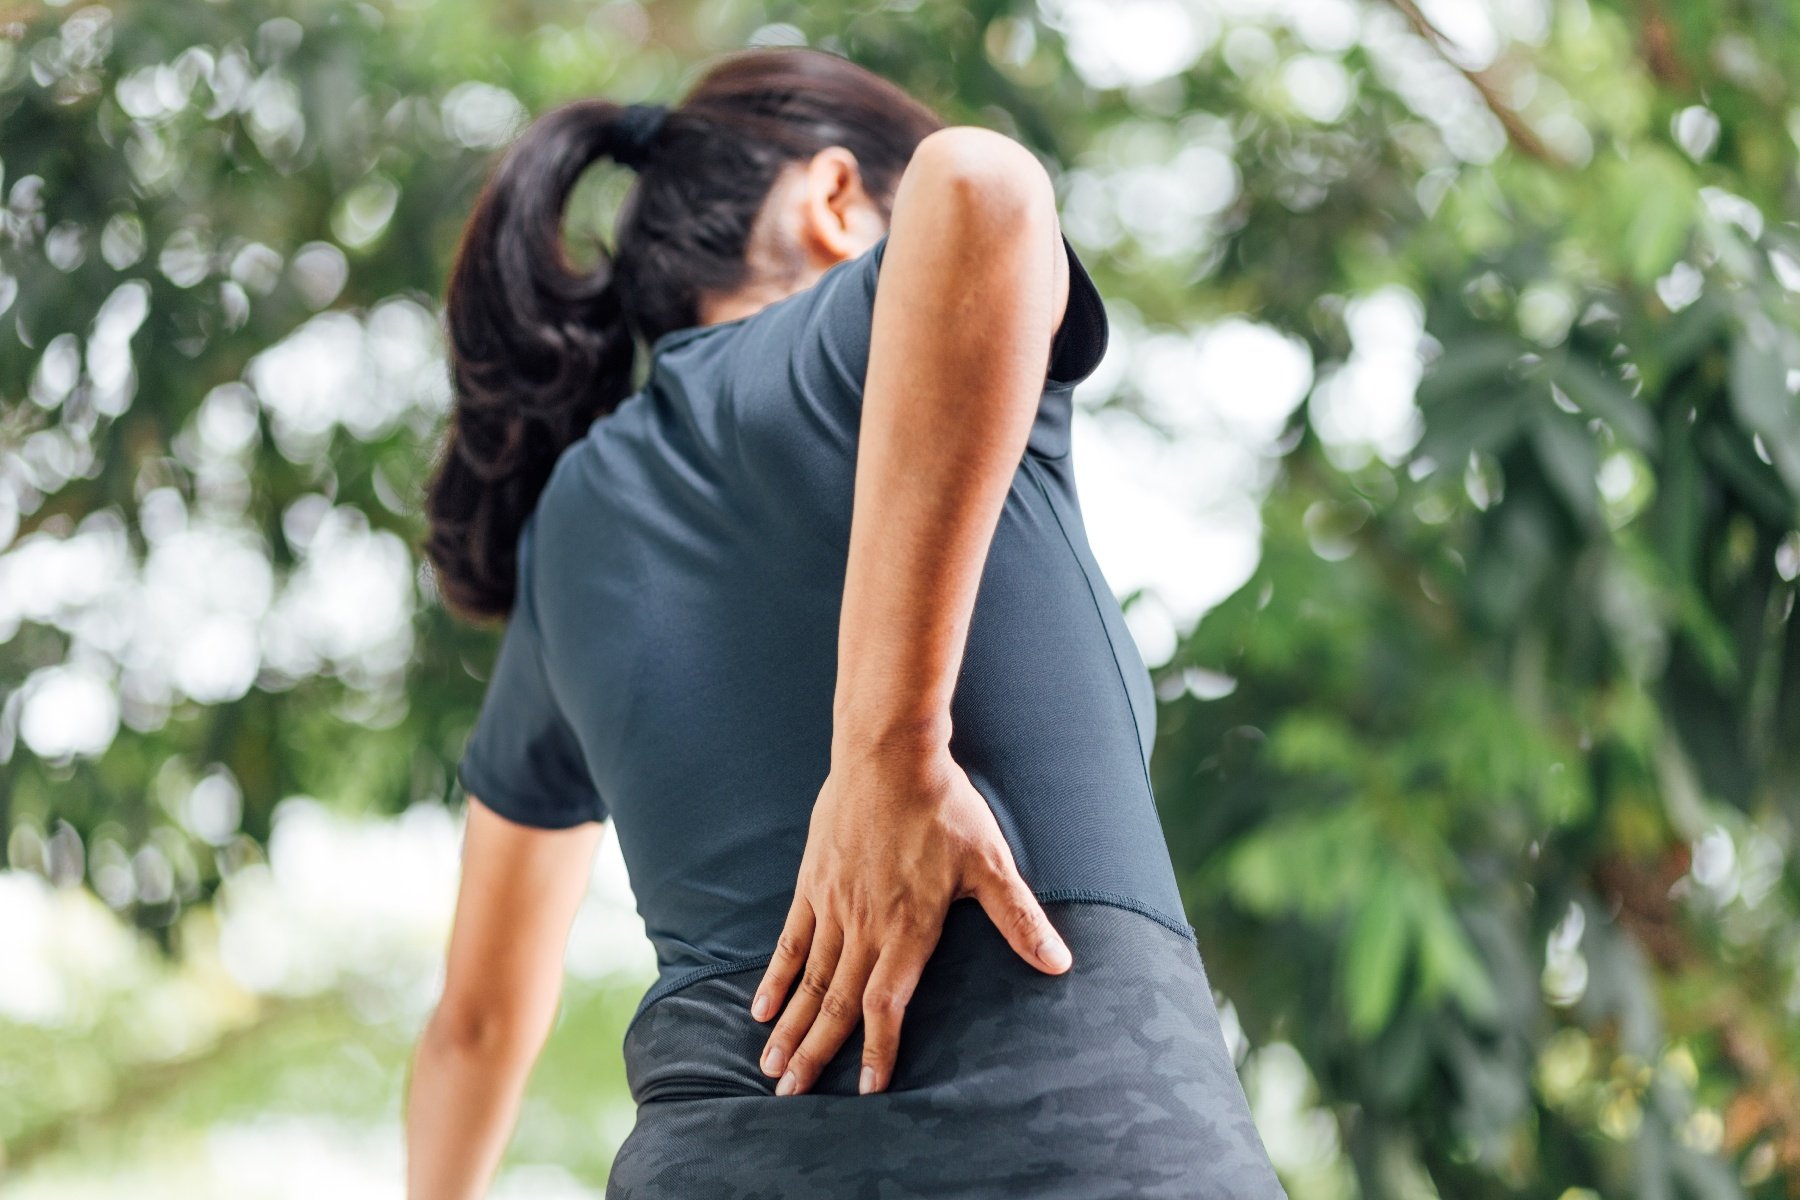 Outpatient Therapy Services: What is the Difference Between Sciatica and Sacroiliitis?